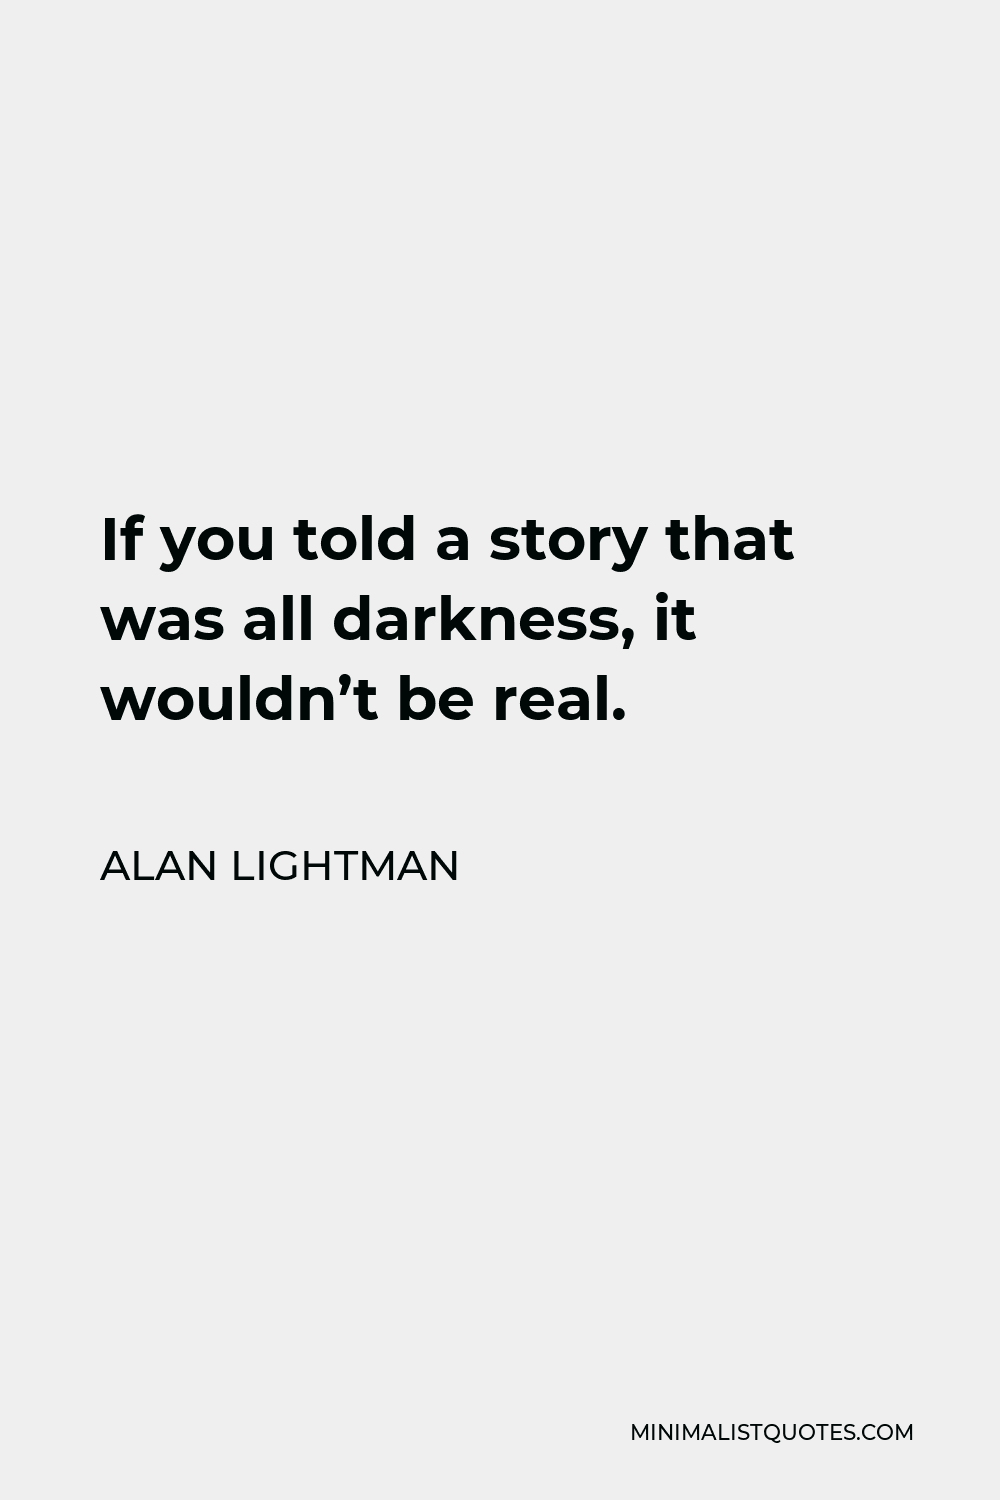 Alan Lightman Quote - If you told a story that was all darkness, it wouldn’t be real.